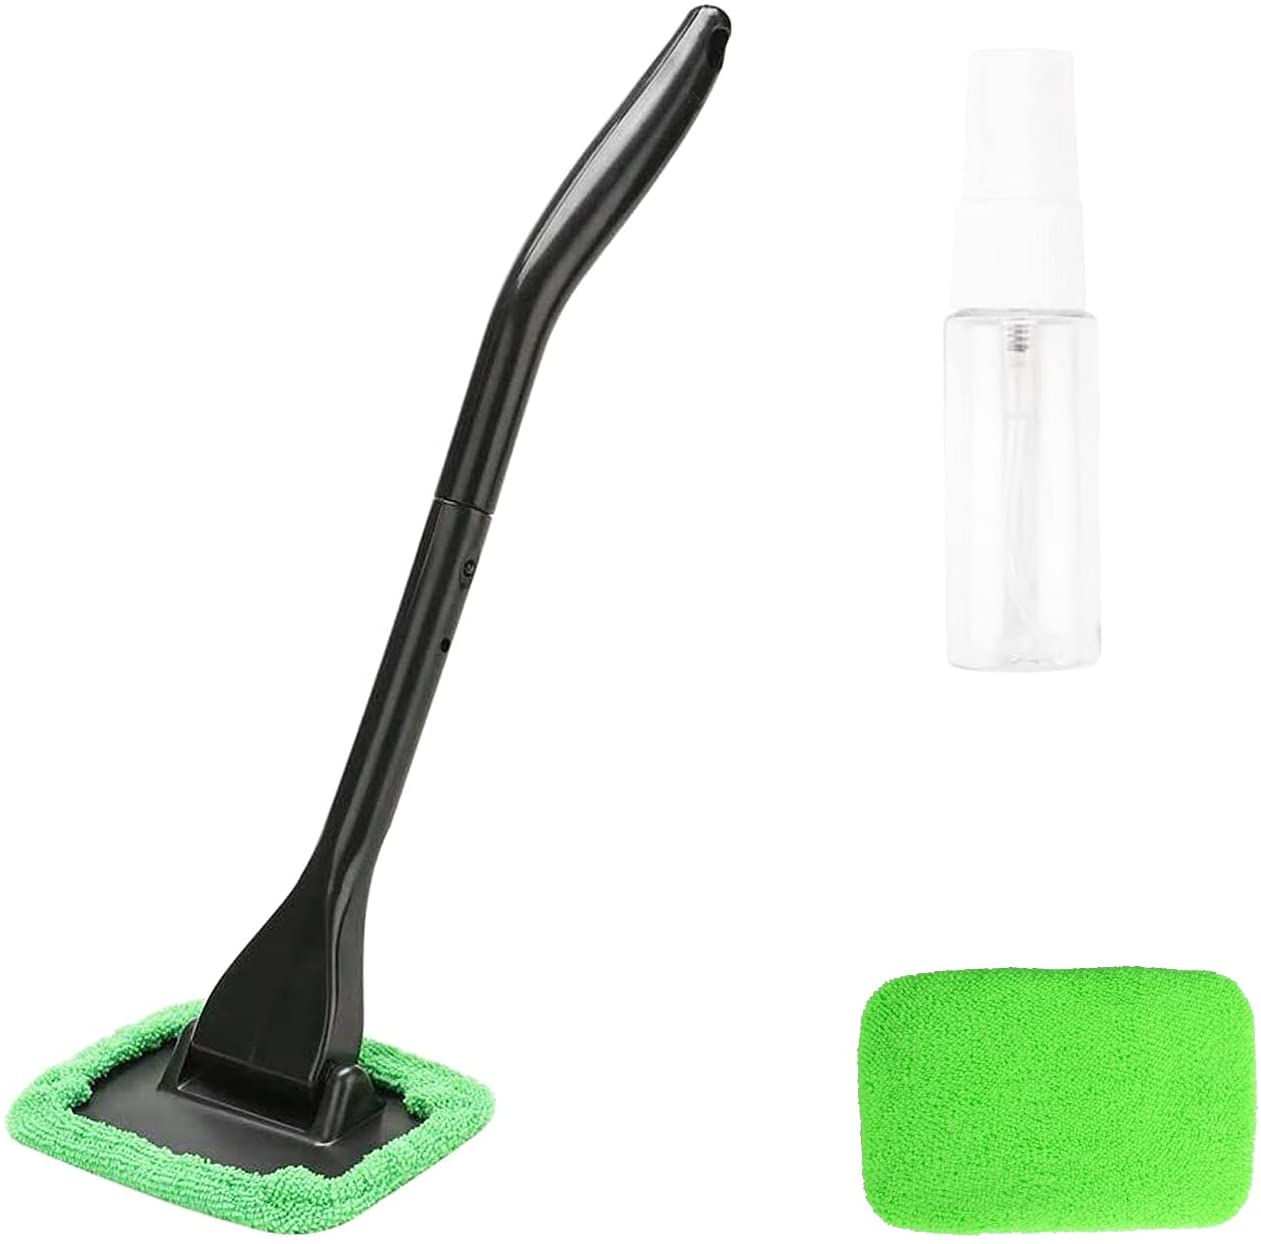 Car Windshield Cleaner Brush Extendable Windshield Cleaning Tool